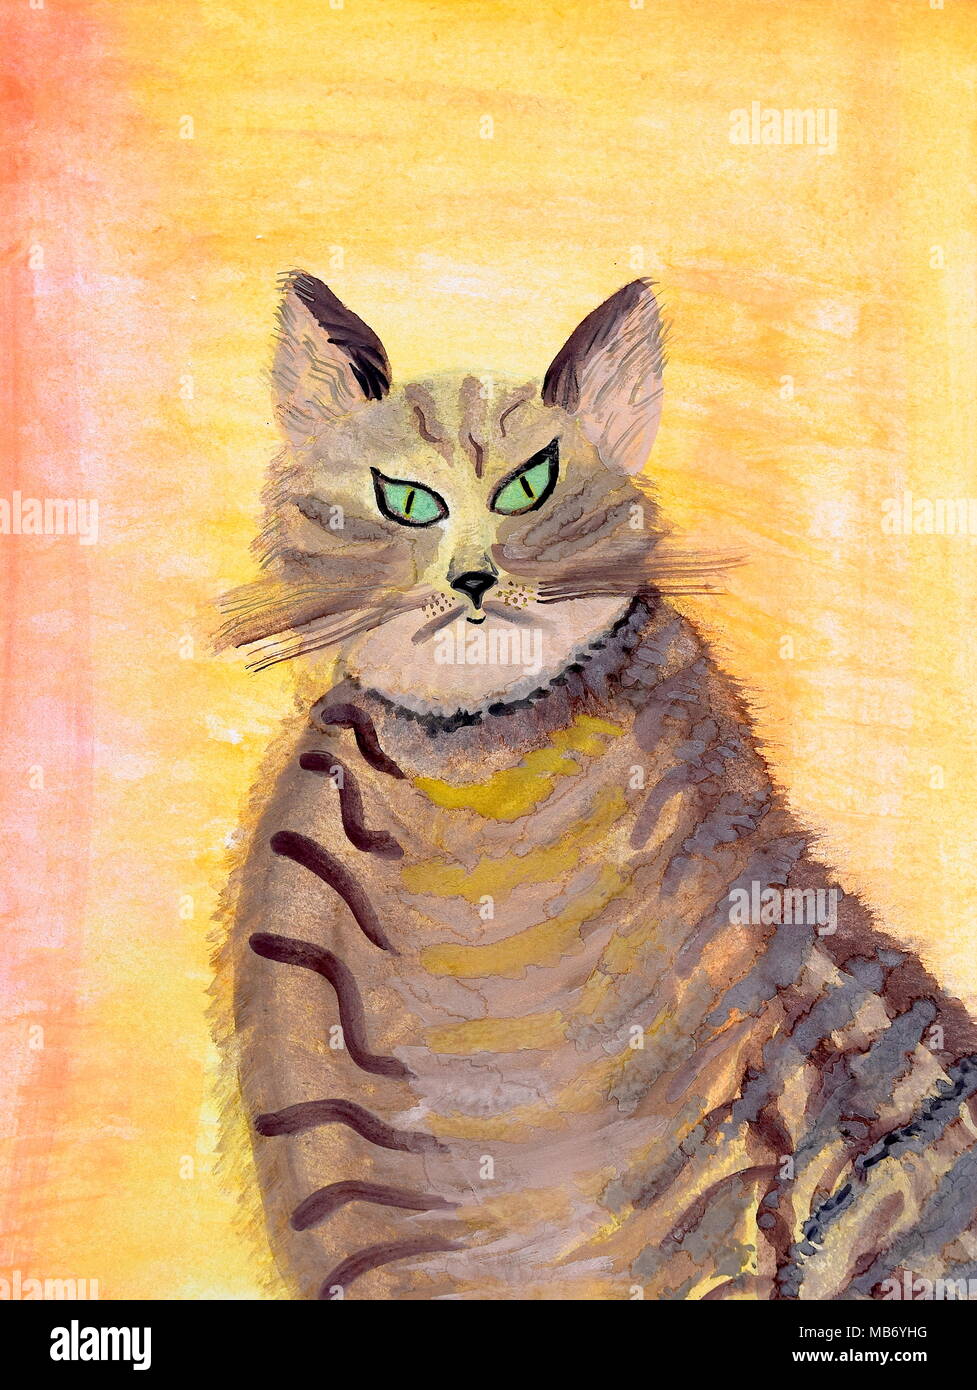 Cat with green eyes watercolour drawing Stock Photo